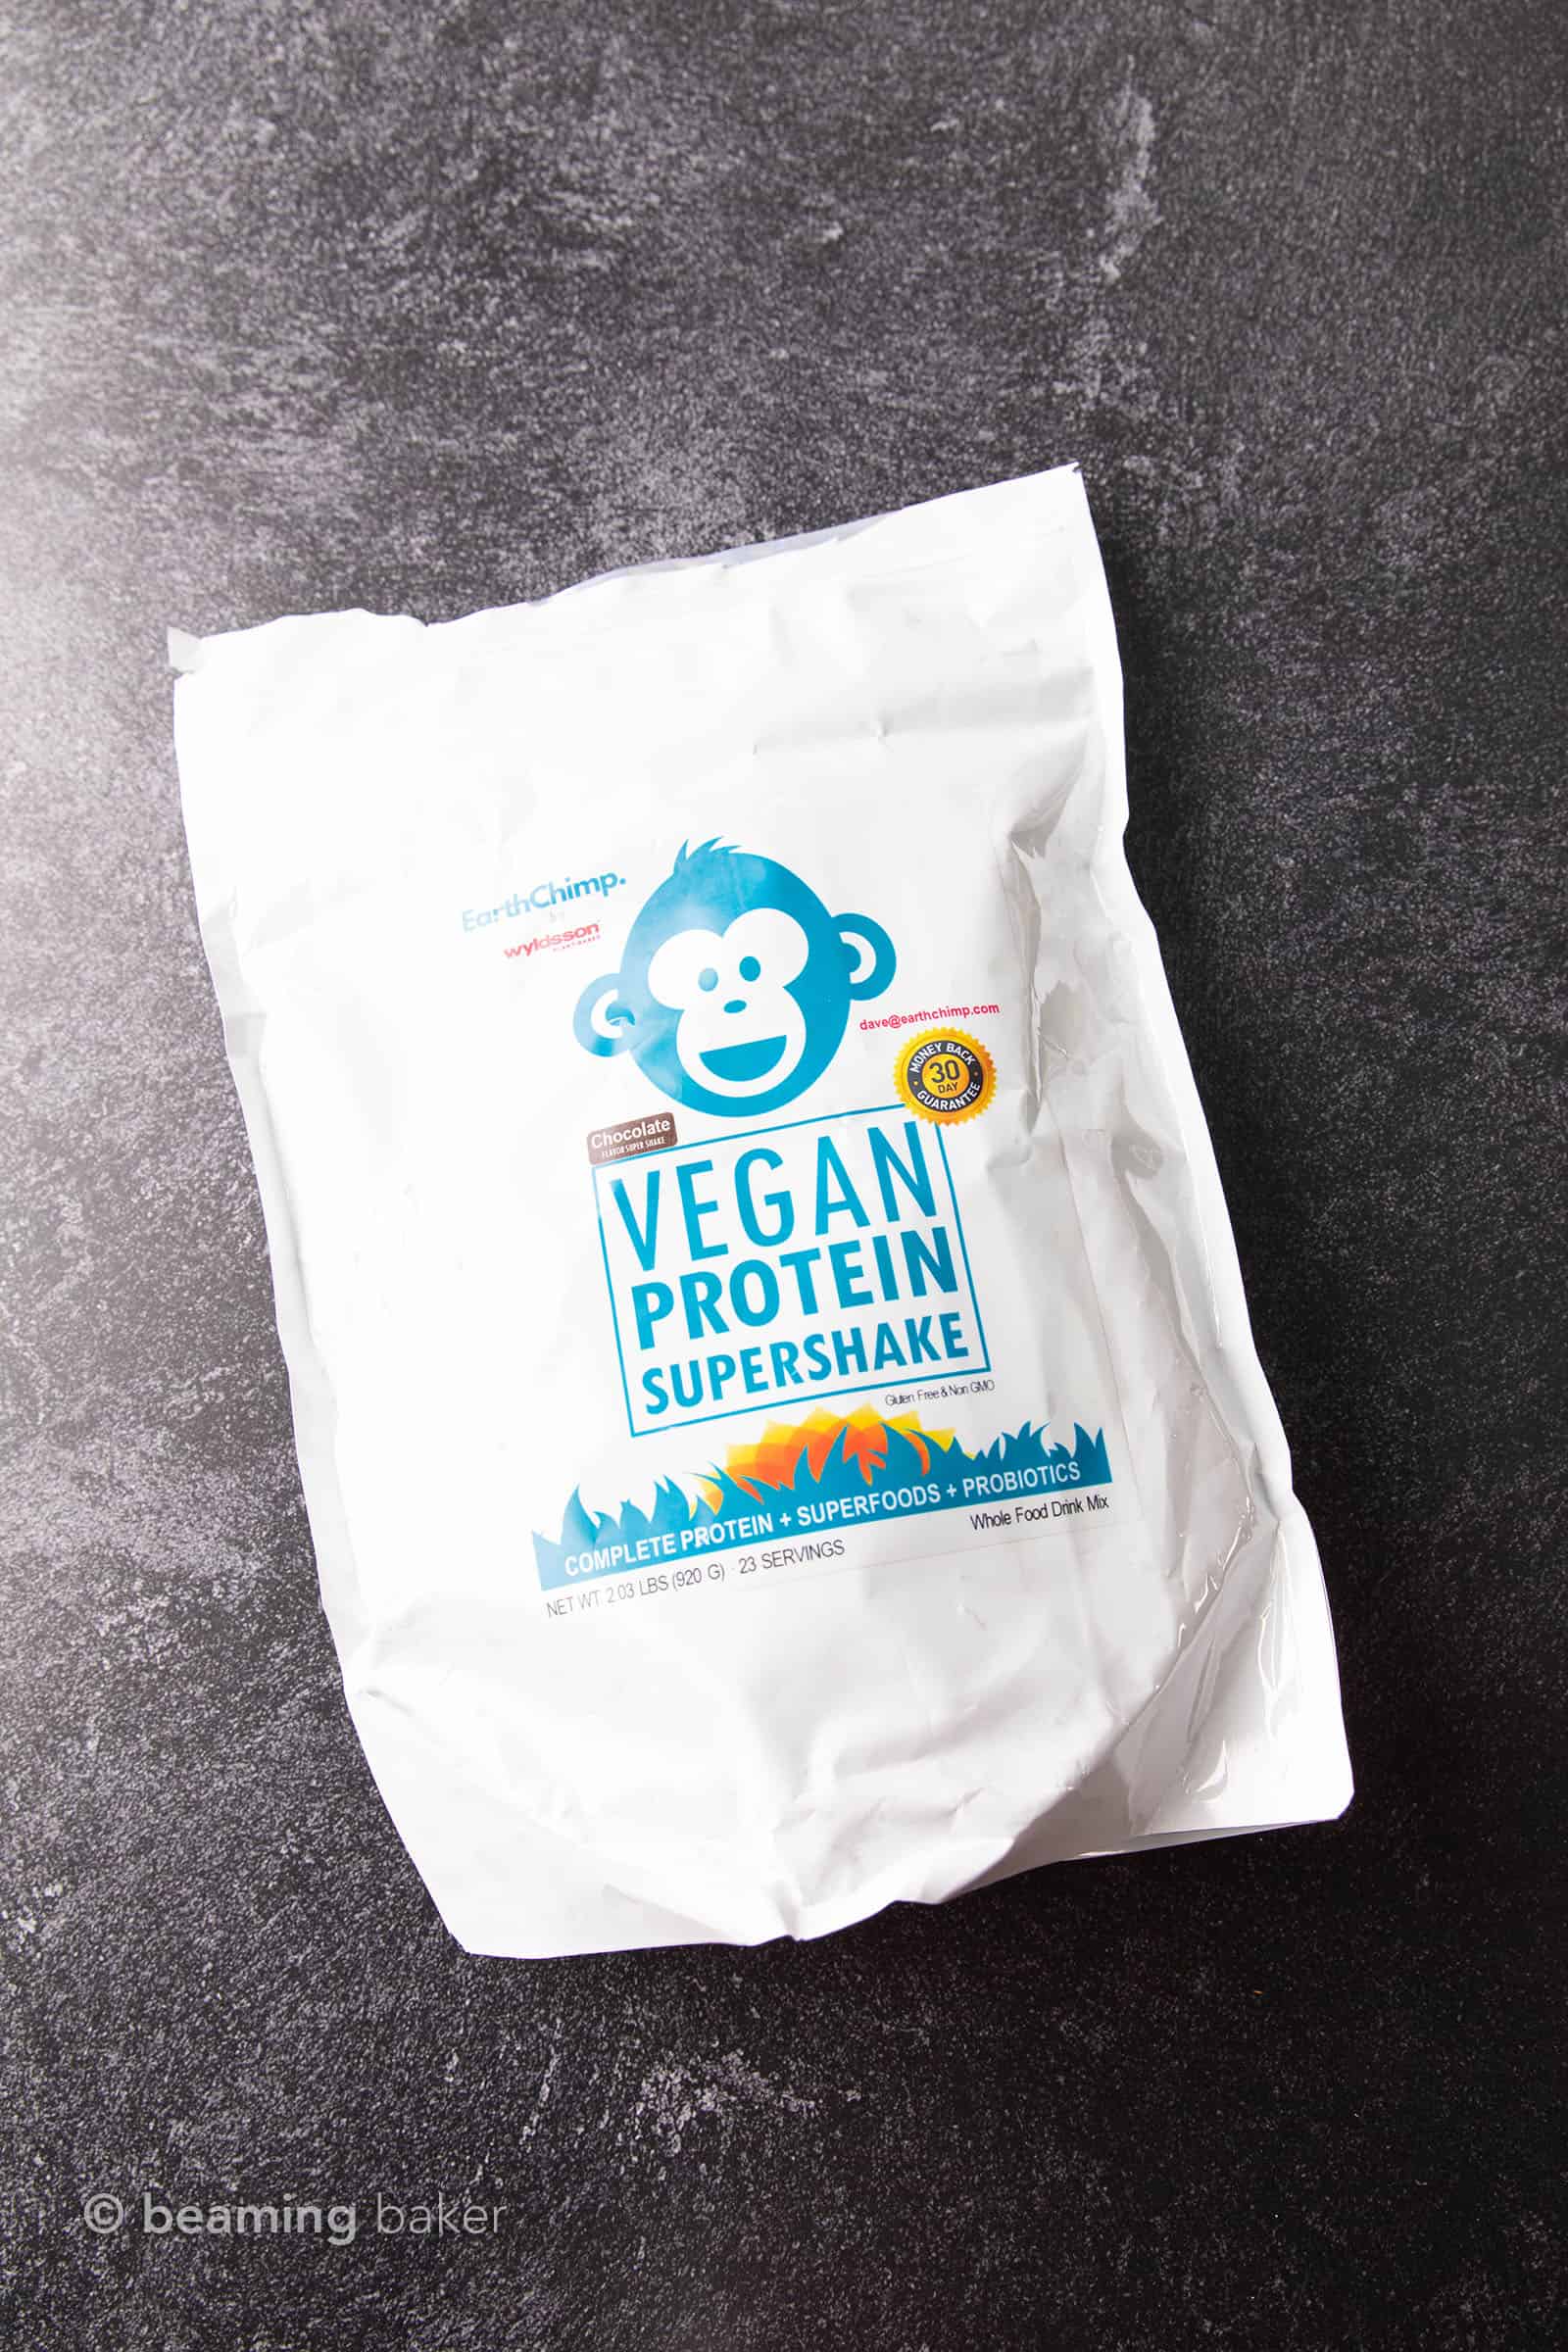 Best Vegan Protein Powder Review: my review guide of the best tasting vegan protein powder to the worst—chocolate edition! Plant-Based. #Vegan #ProteinPowder #PlantBased #VeganProtein | Review + Recipe at topqa.info